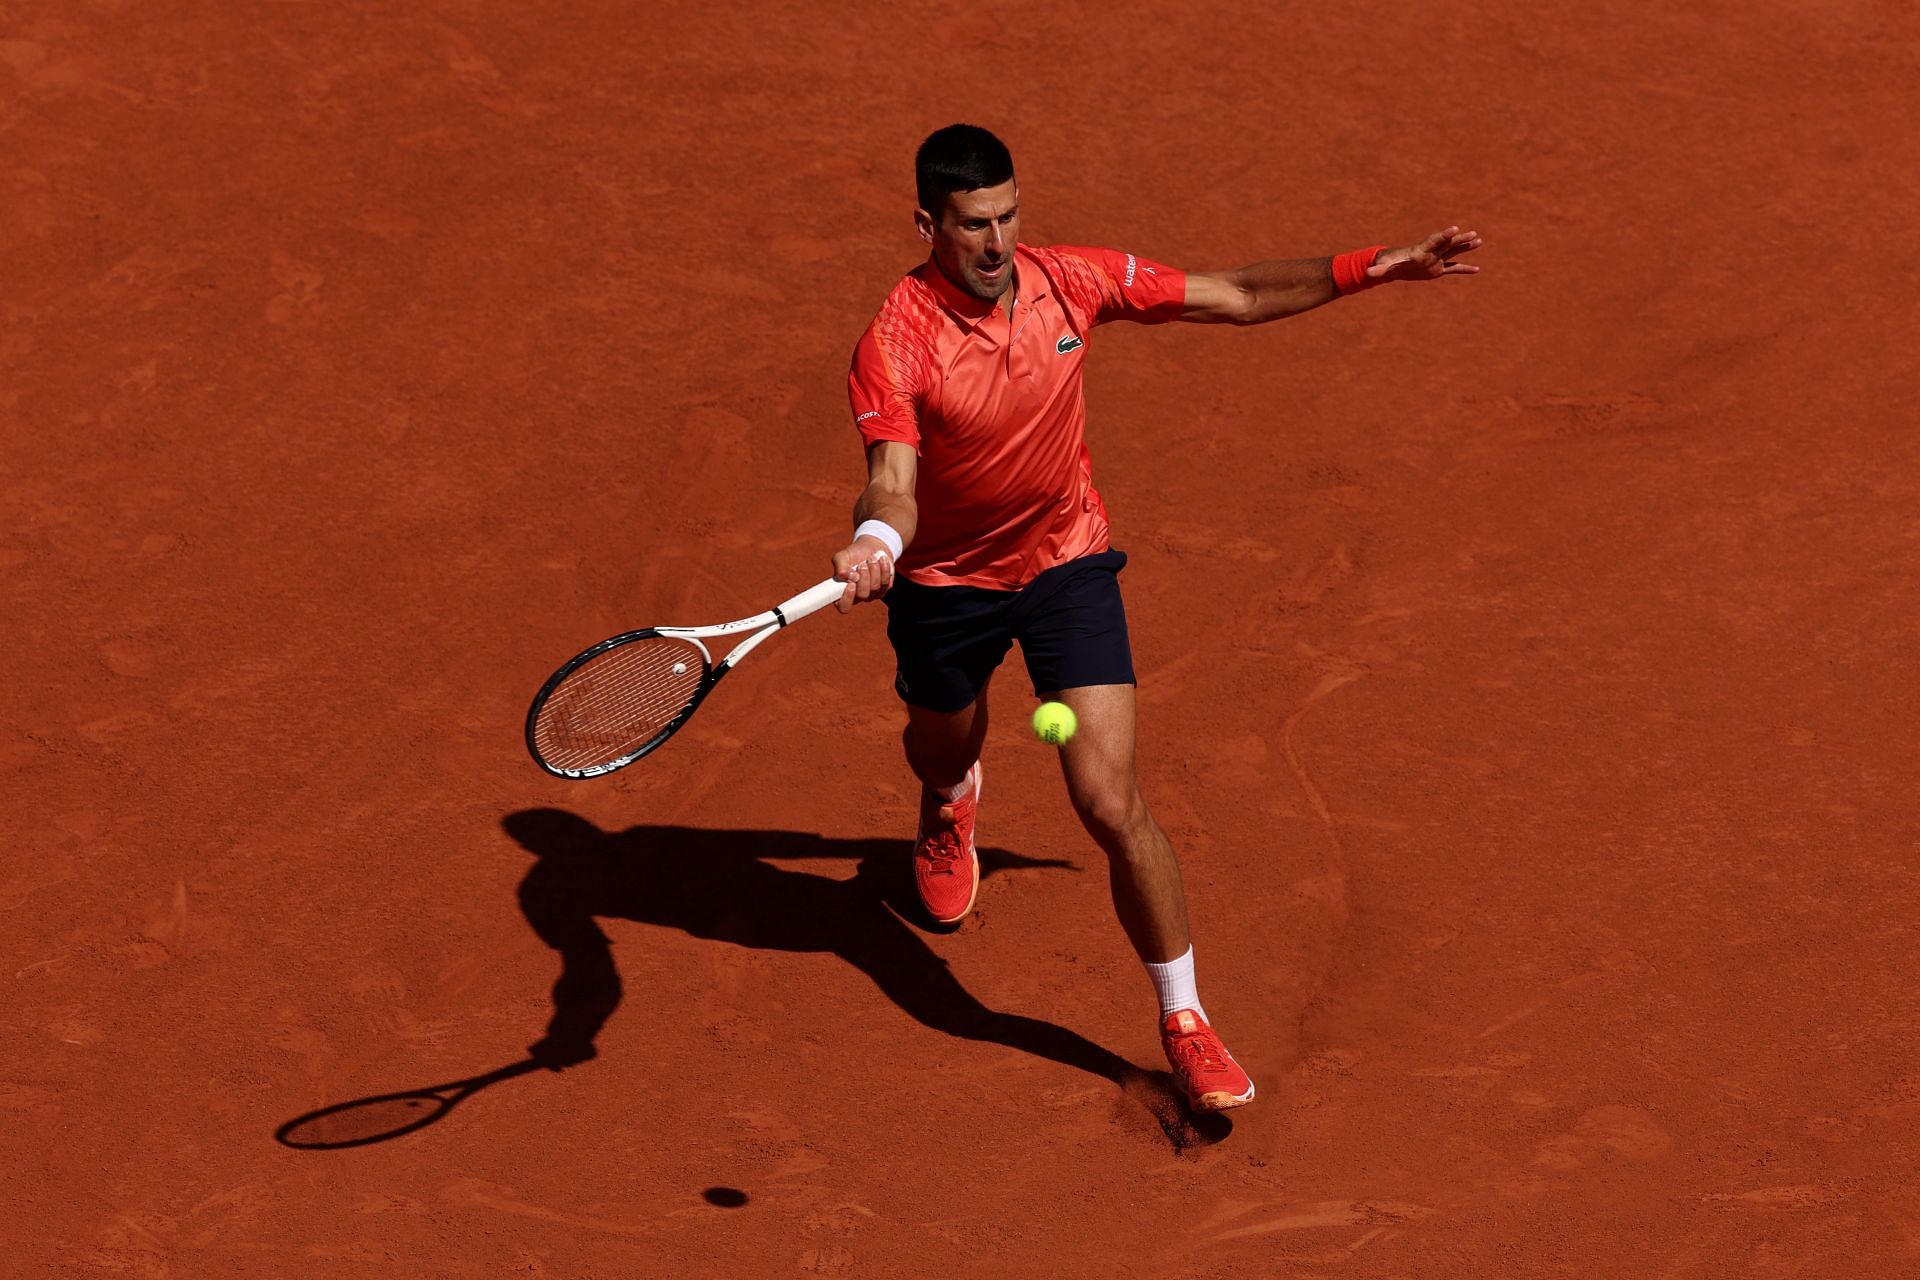 Djokovic is into the French Open quarterfinals for the 17th time